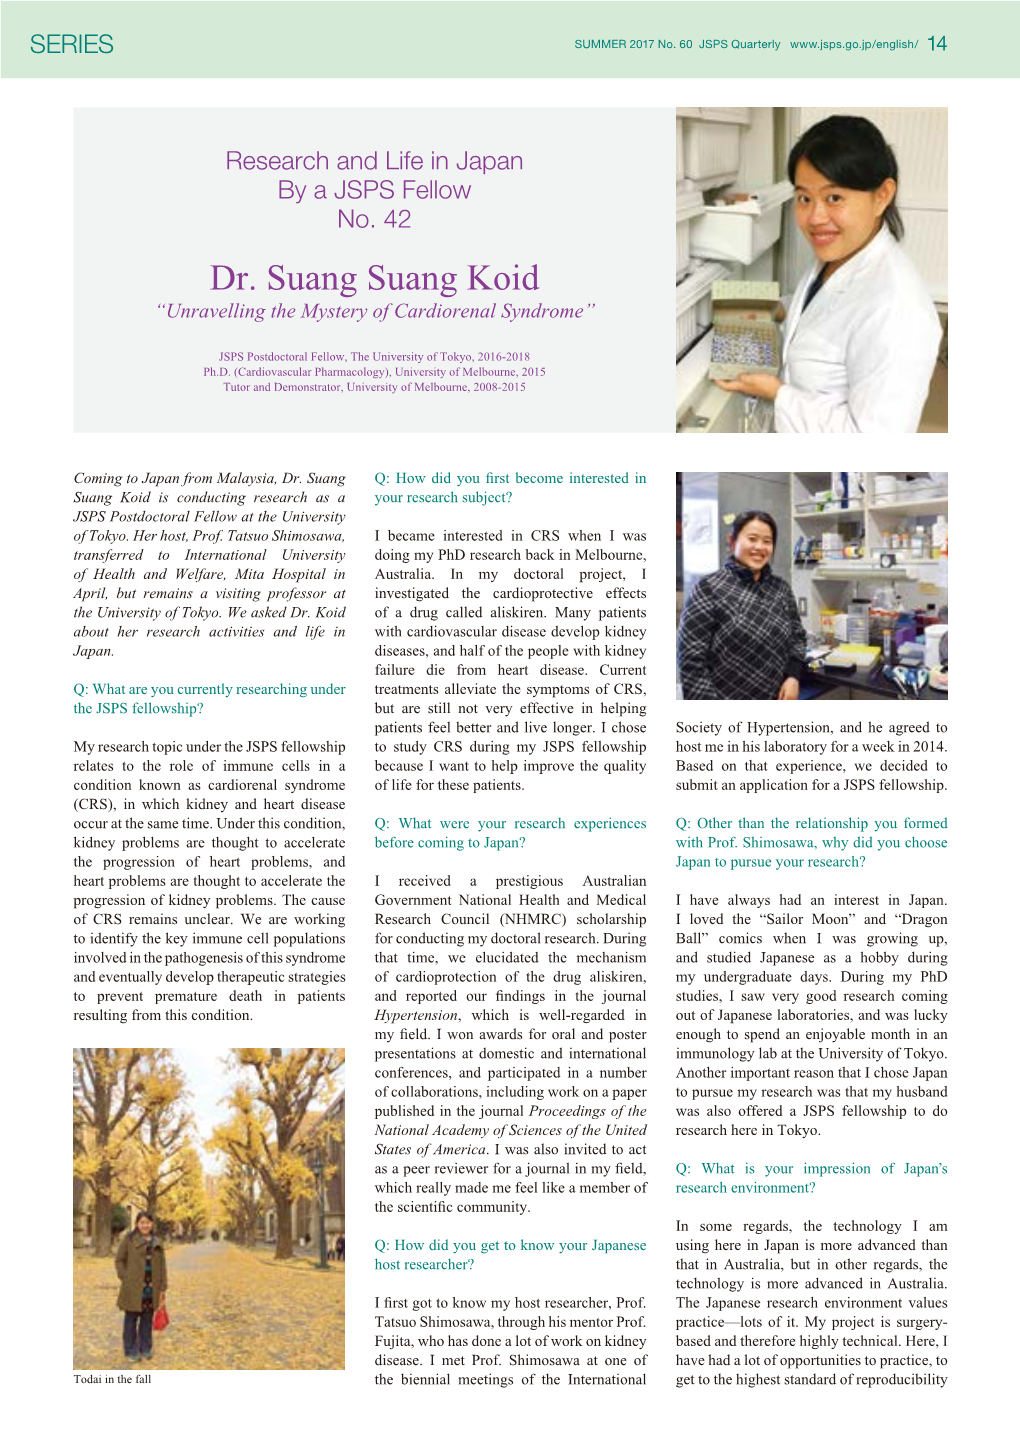 Dr. Suang Suang Koid “Unravelling the Mystery of Cardiorenal Syndrome”